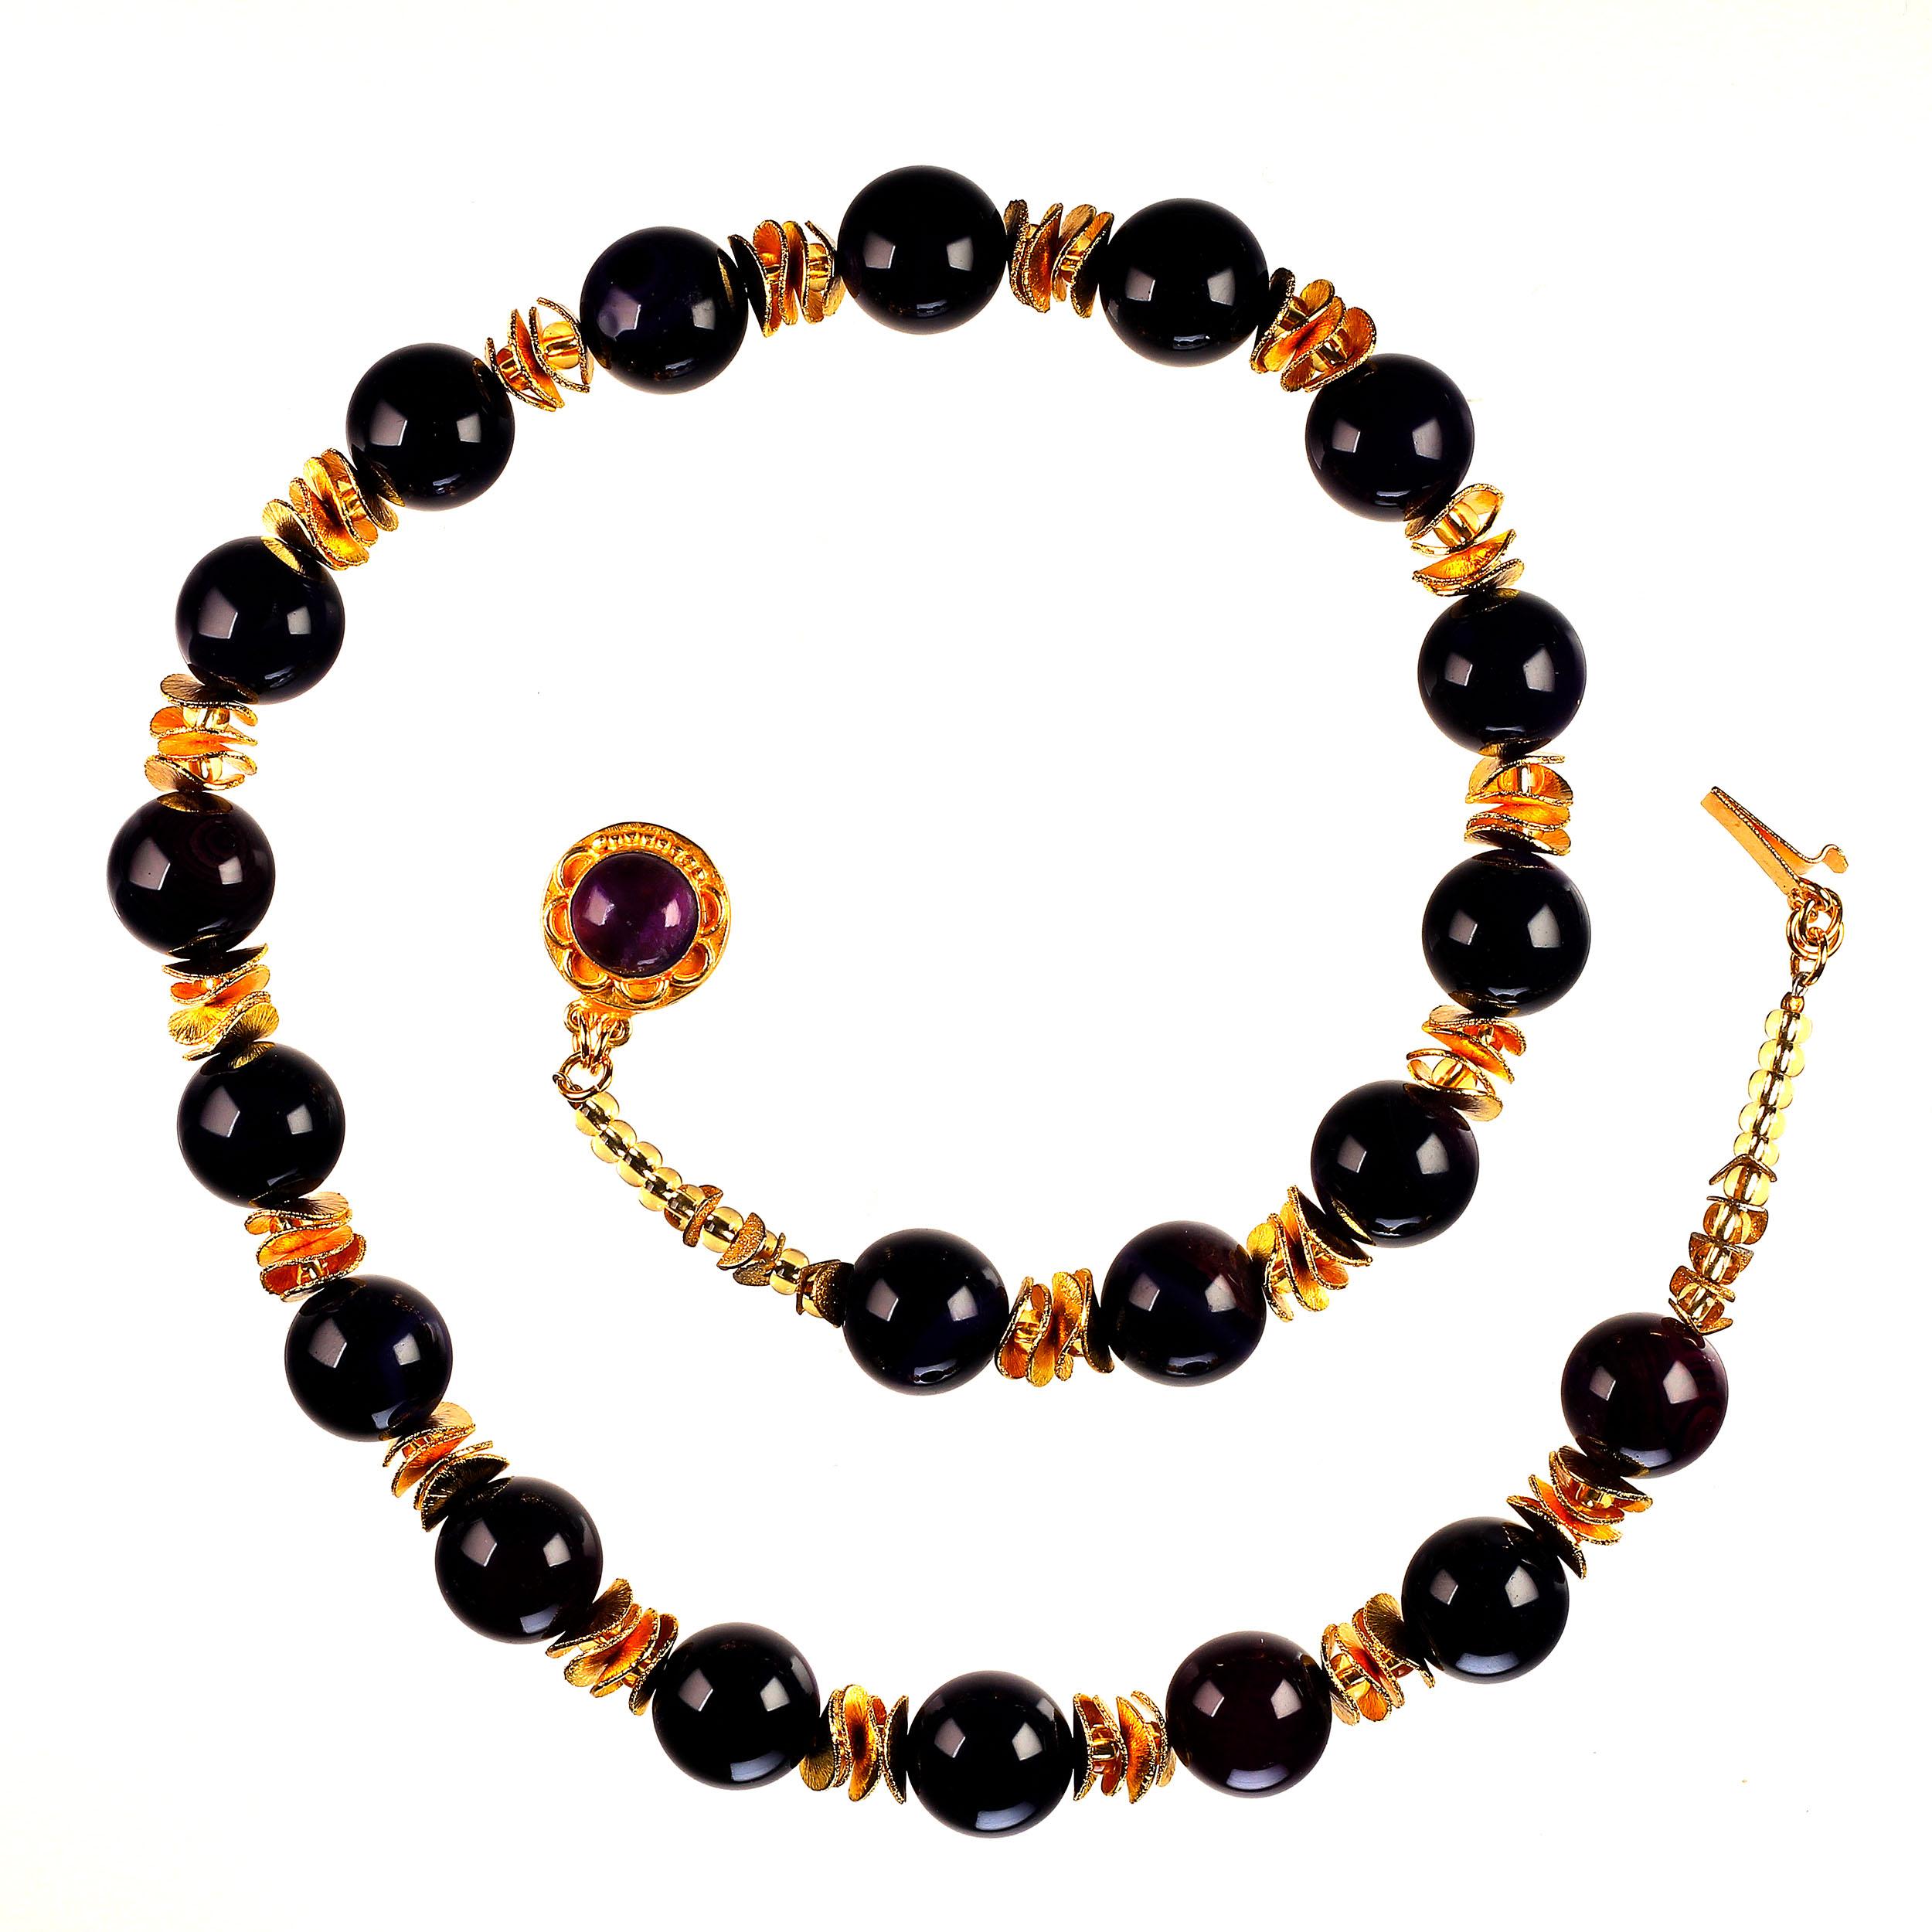 Artisan AJD 23 Inch Necklace of Polished Amethyst with Gold Accents February Birthstone